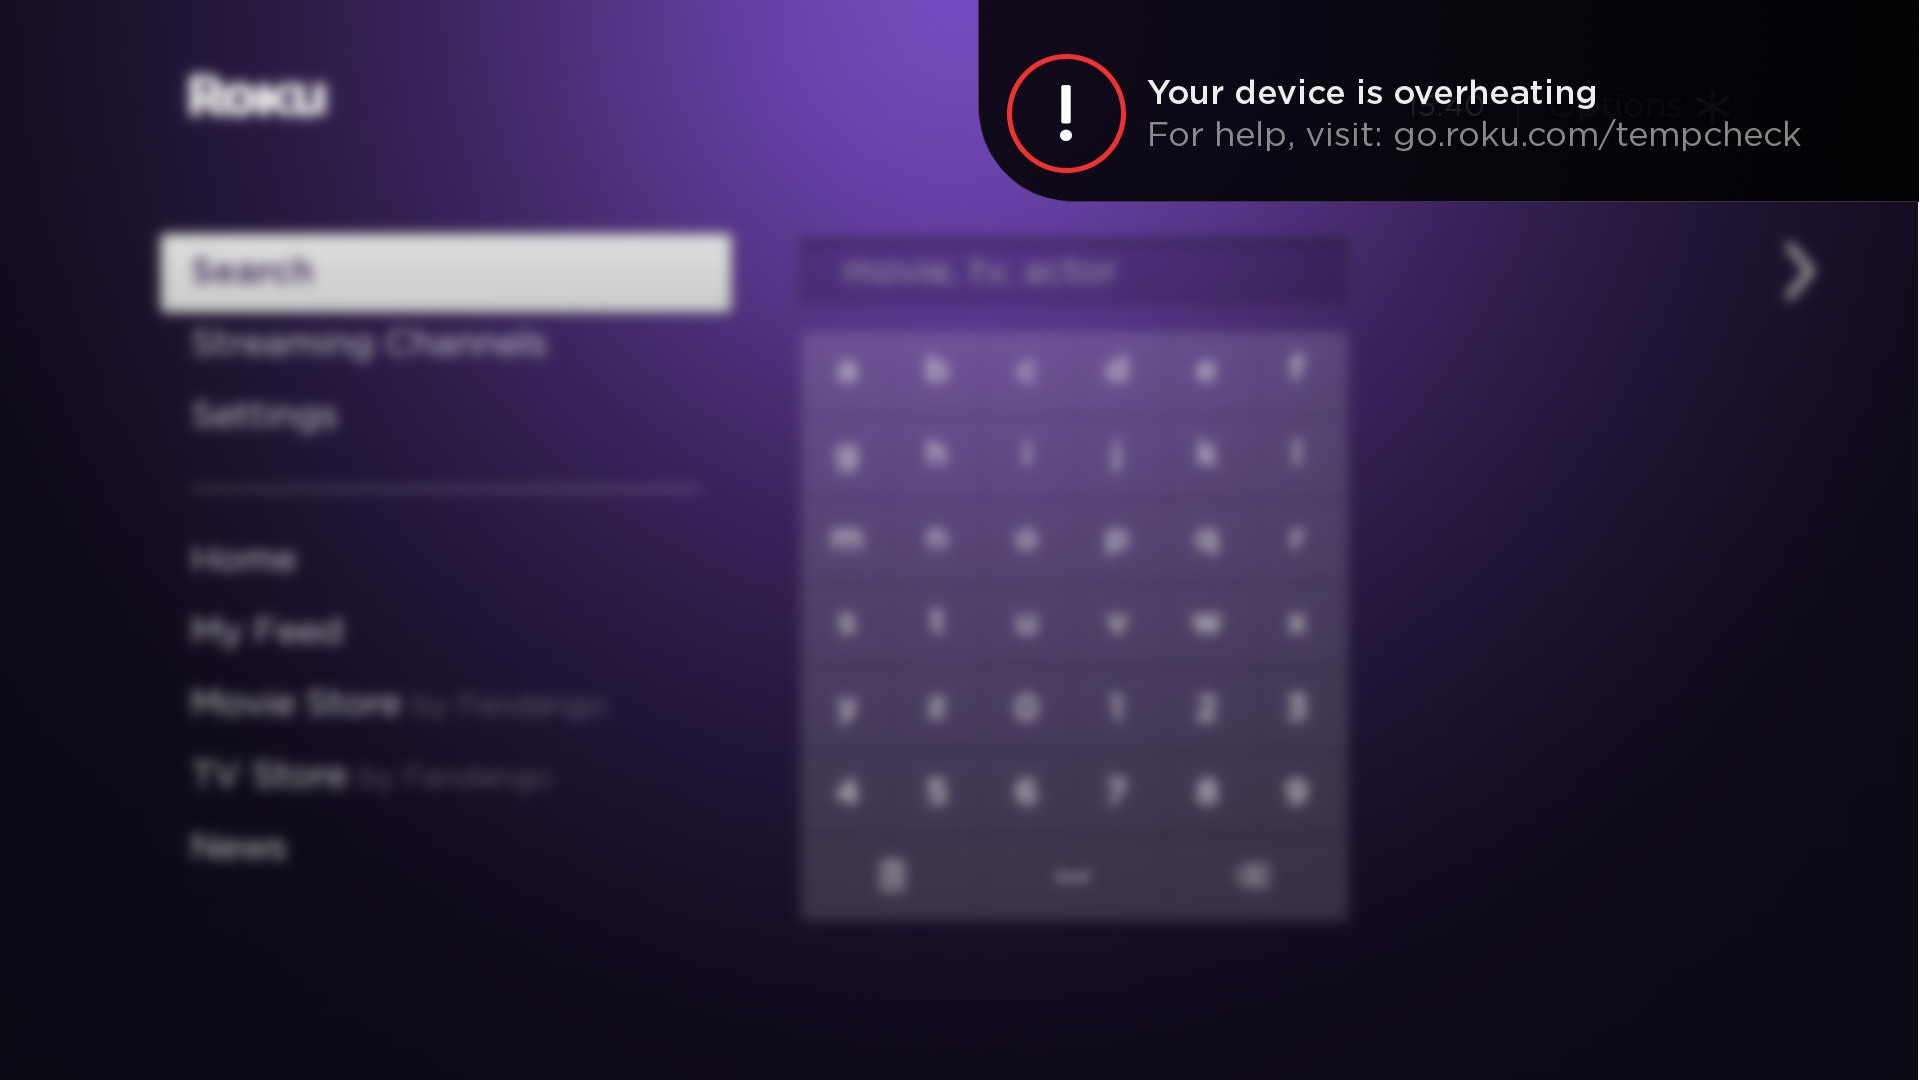 What to do if the red light is on or you see a “Your device is overheating” message Roku